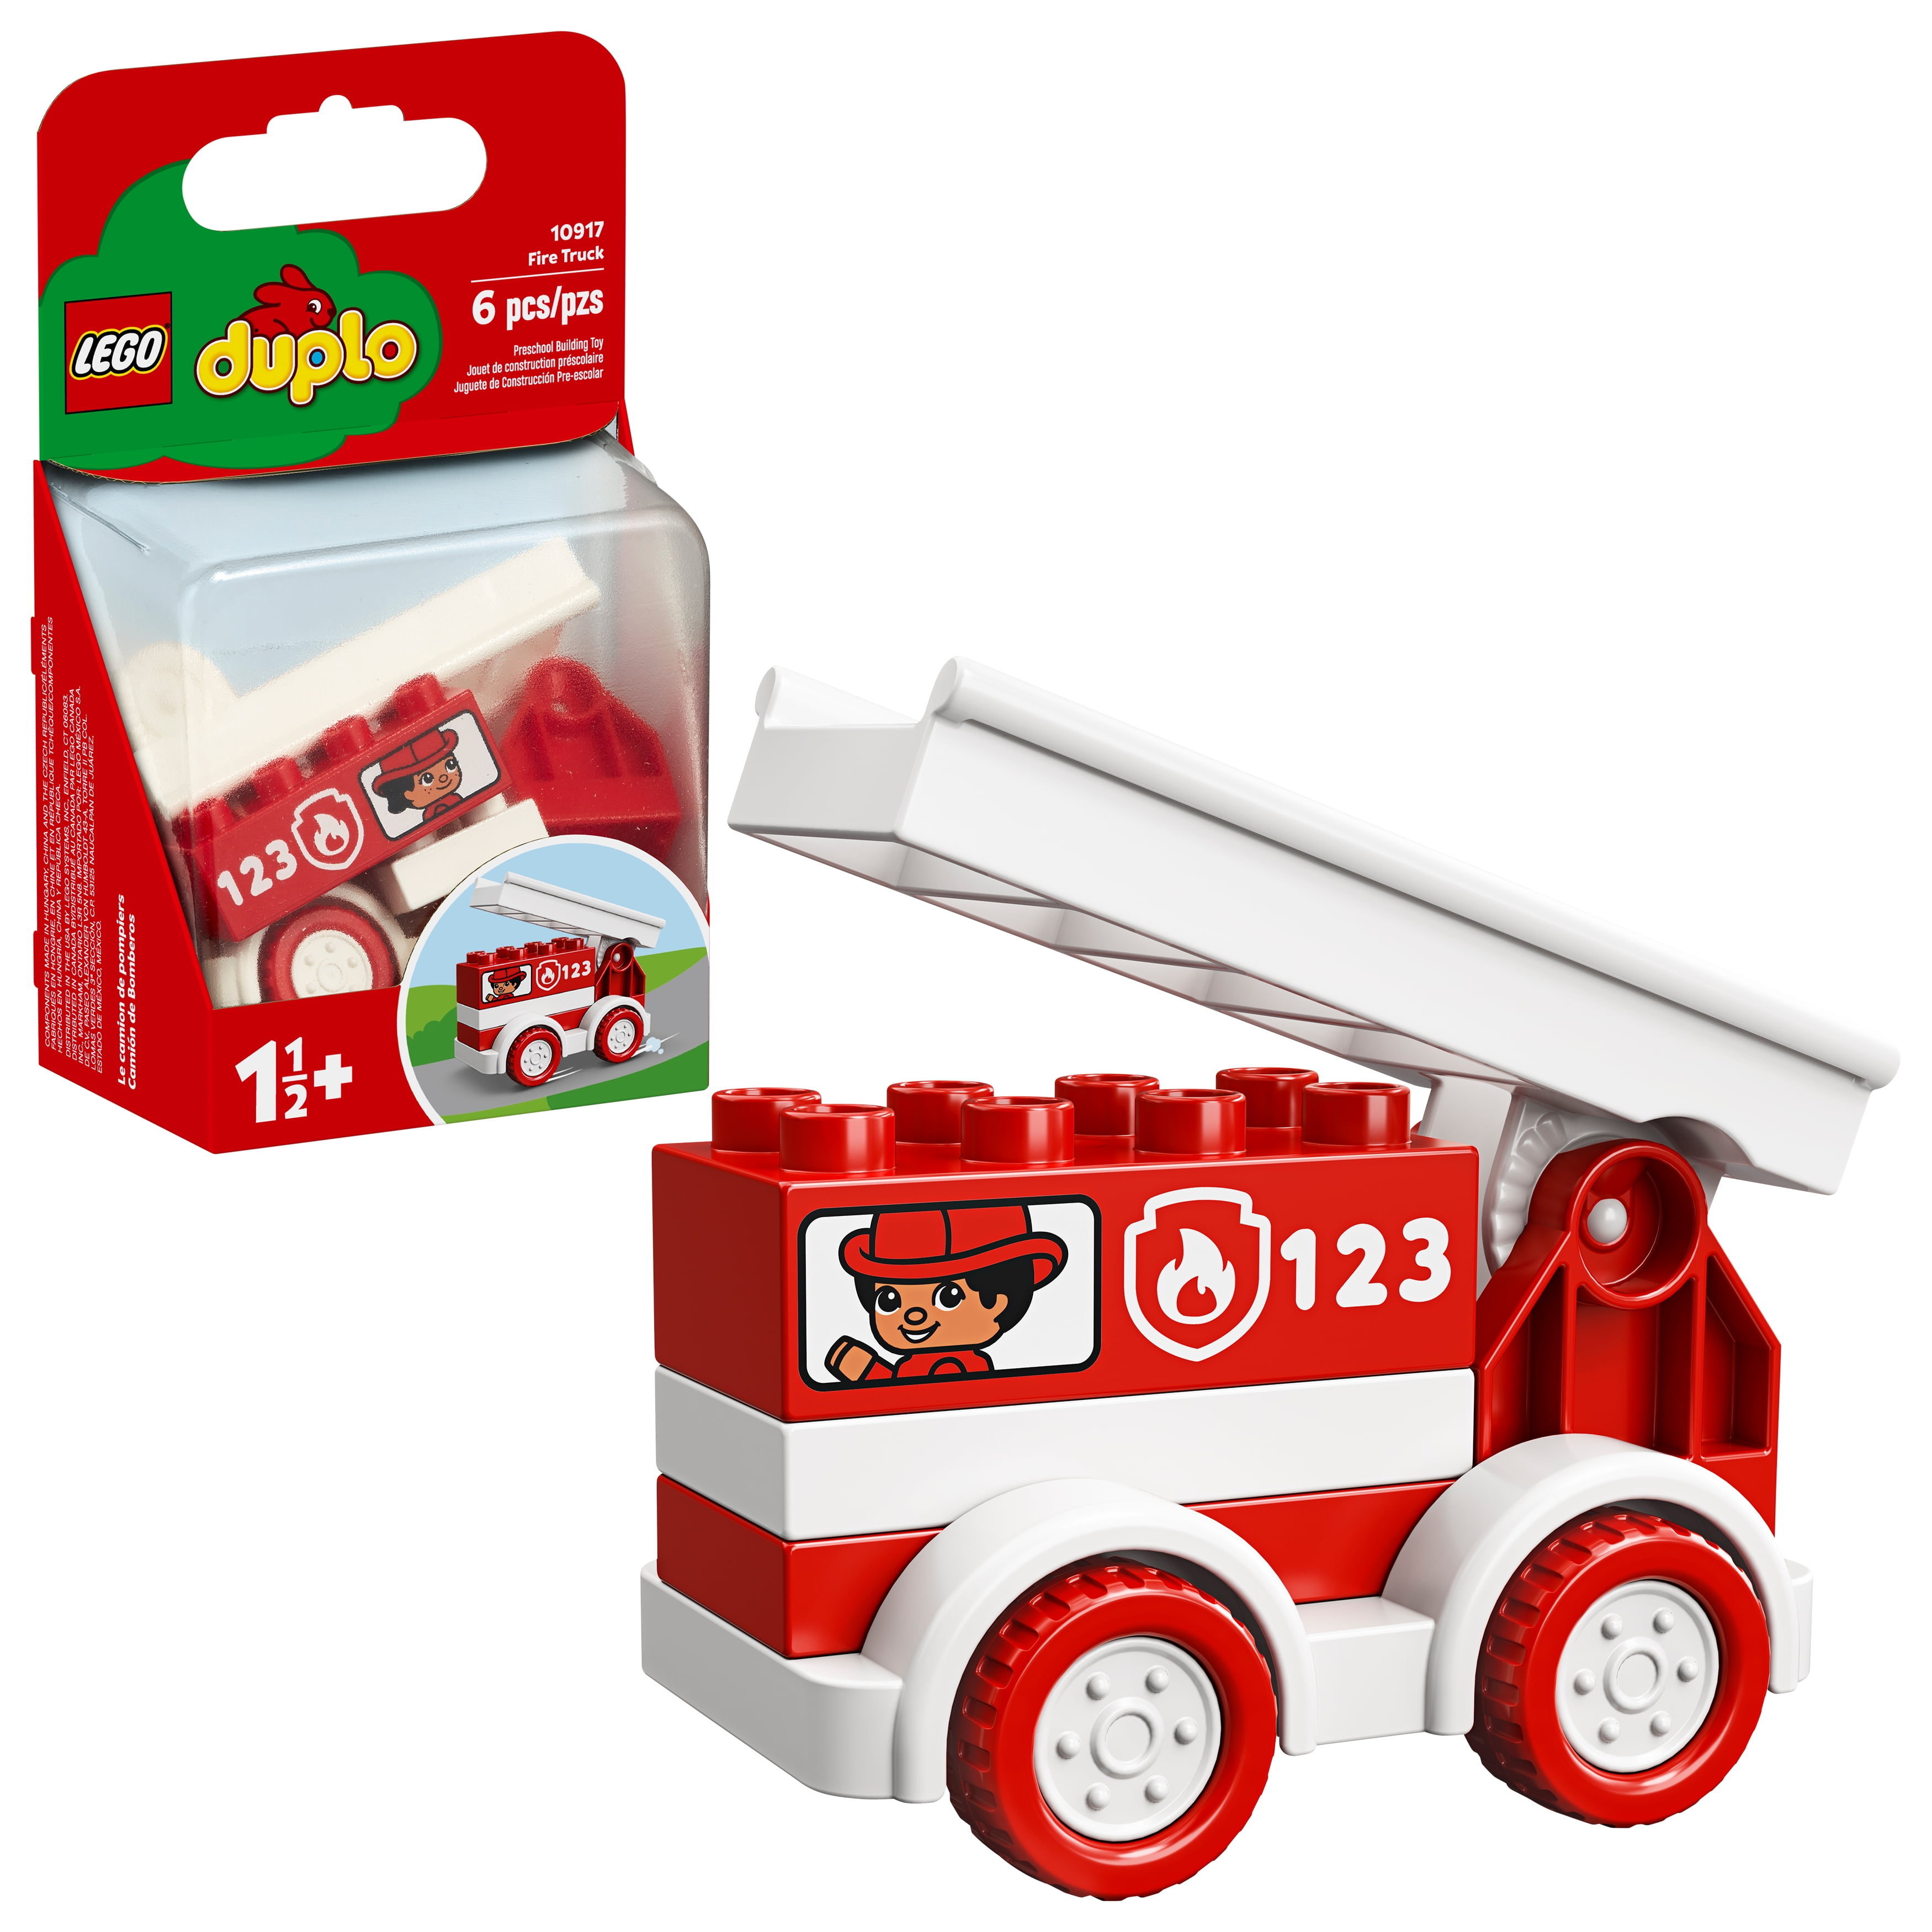 LEGO DUPLO My First Fire Truck 10917 Educational Building Toy for